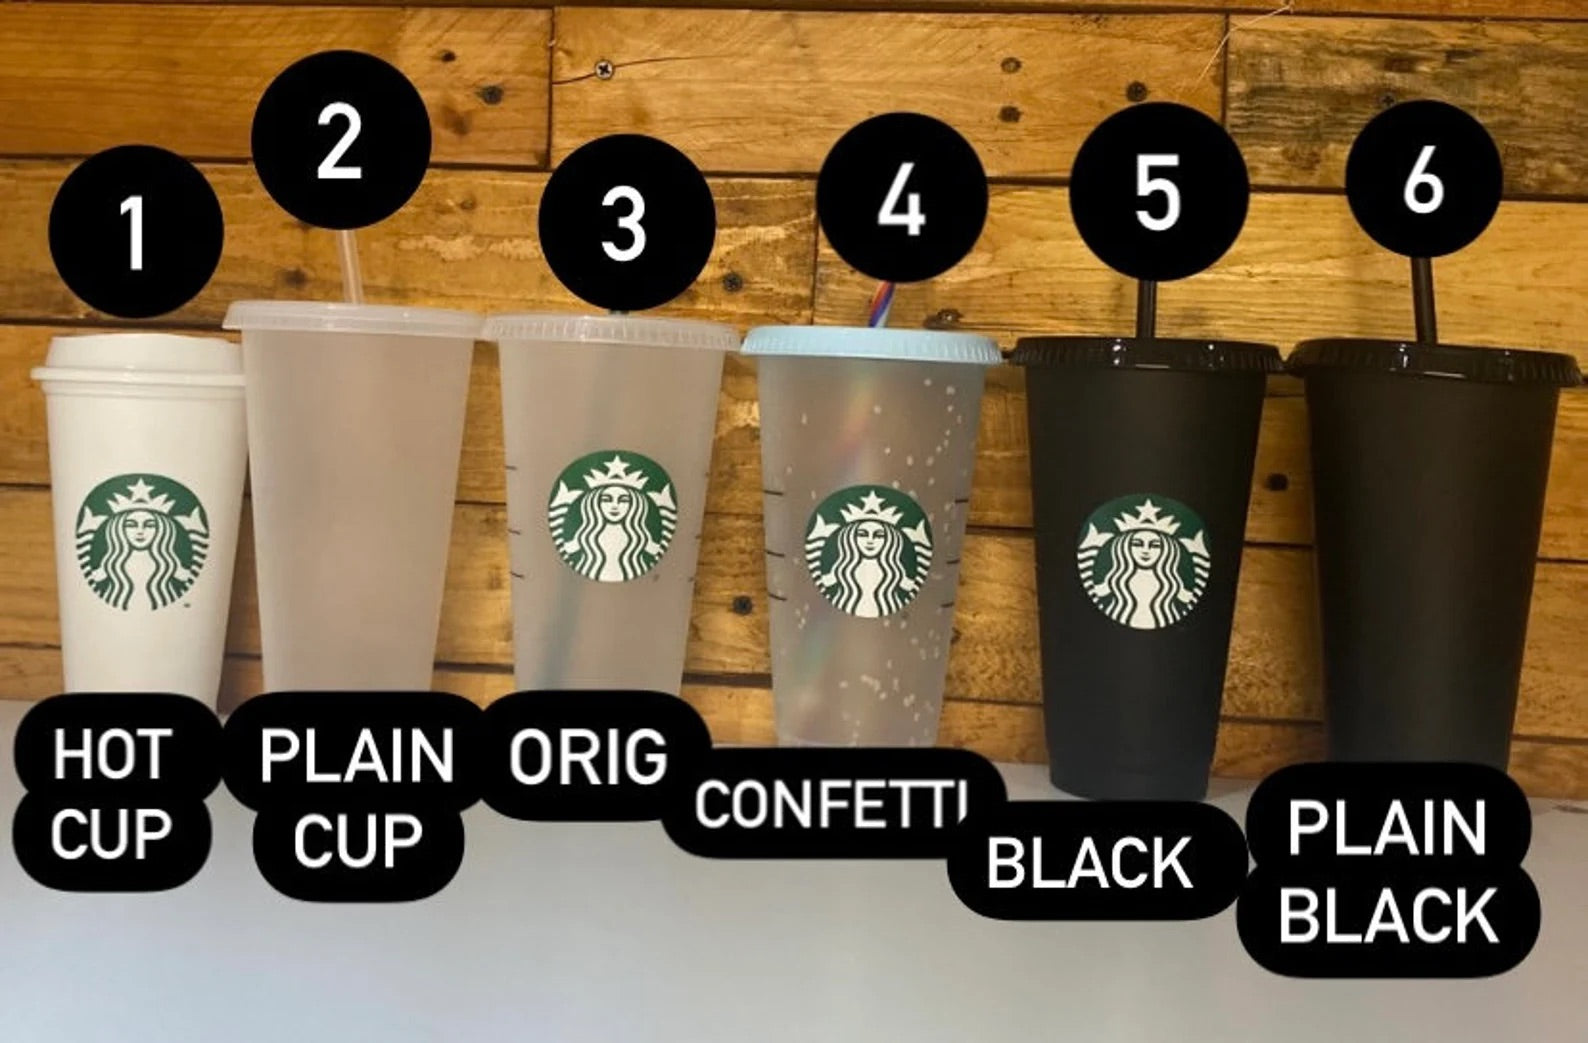 Other, Custom Starbucks Butterfly Cup